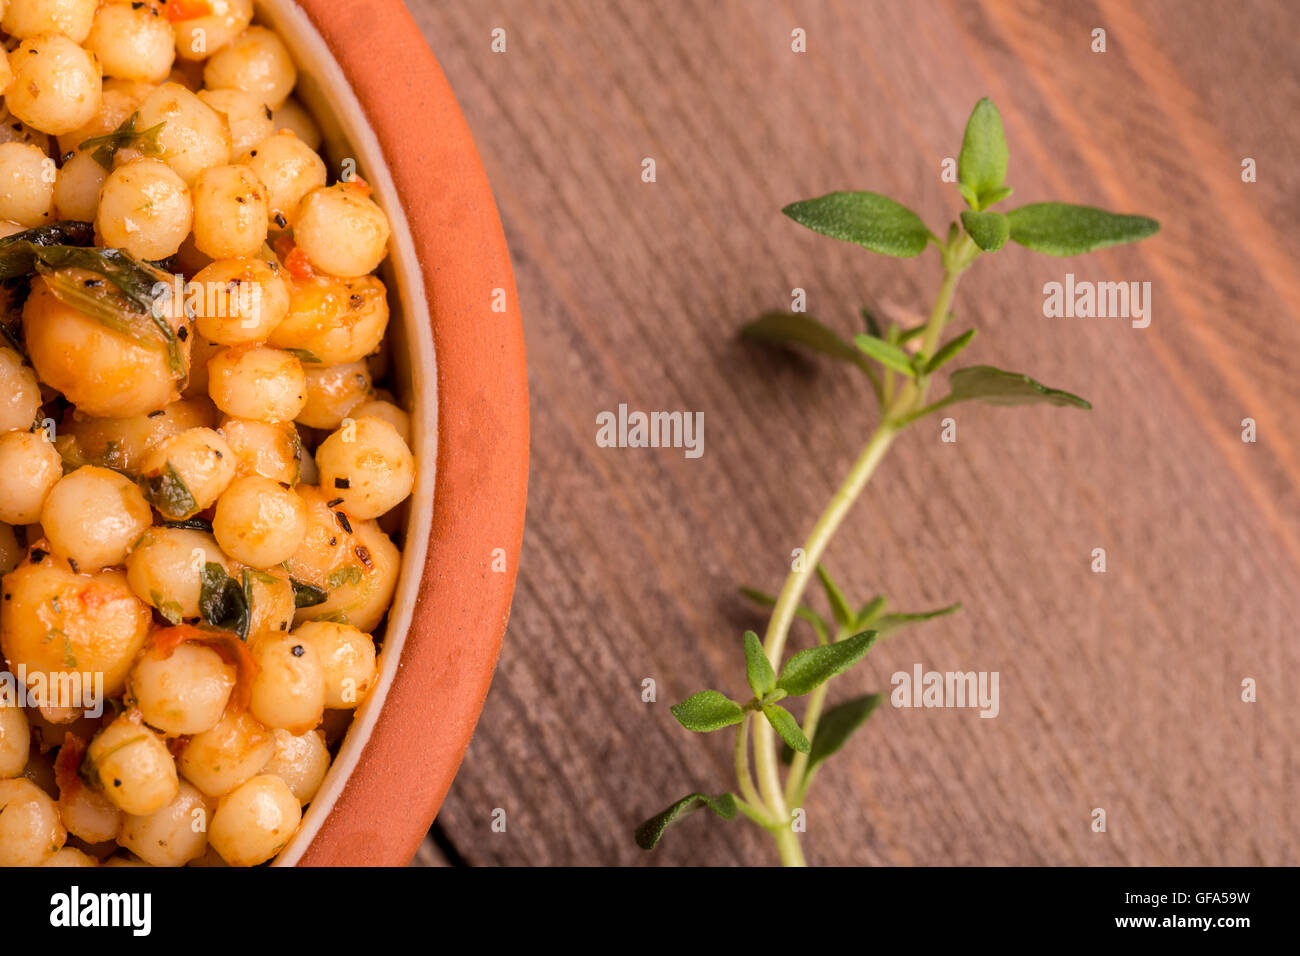 A tasty dish of chick peas with a strand of oregano next to it. Stock Photo